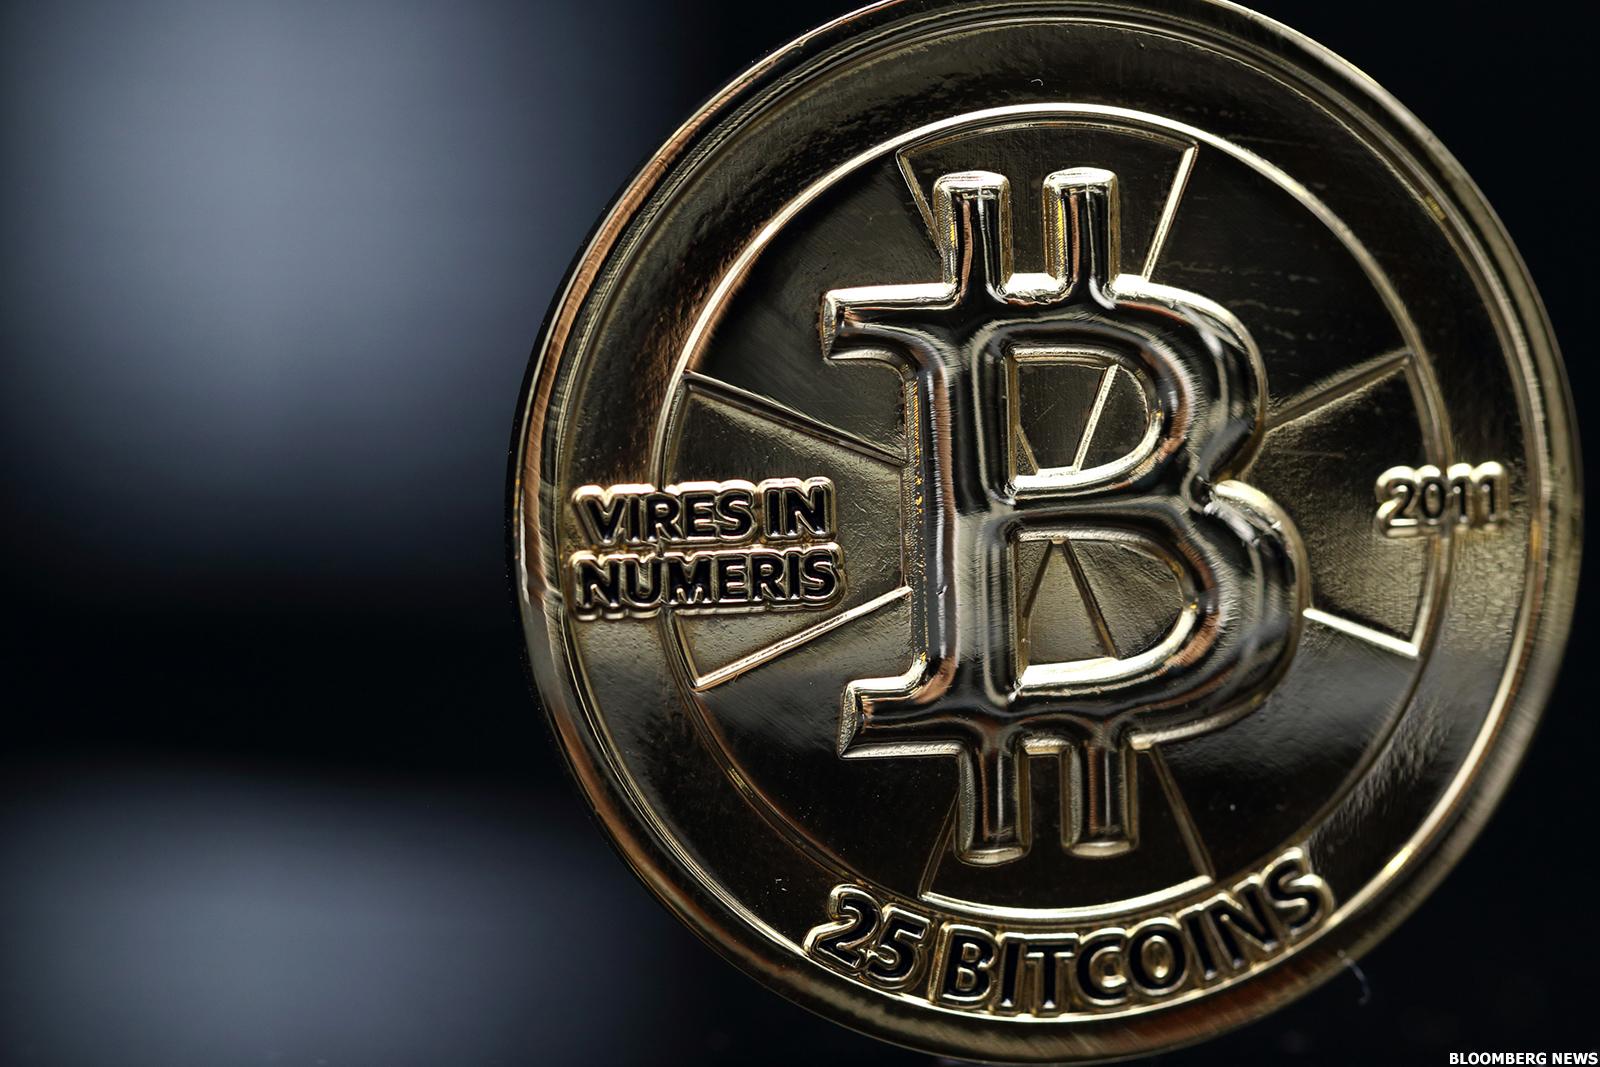 ​Bitcoin, which is not backed by any government, more than quadrupled in value from December to September